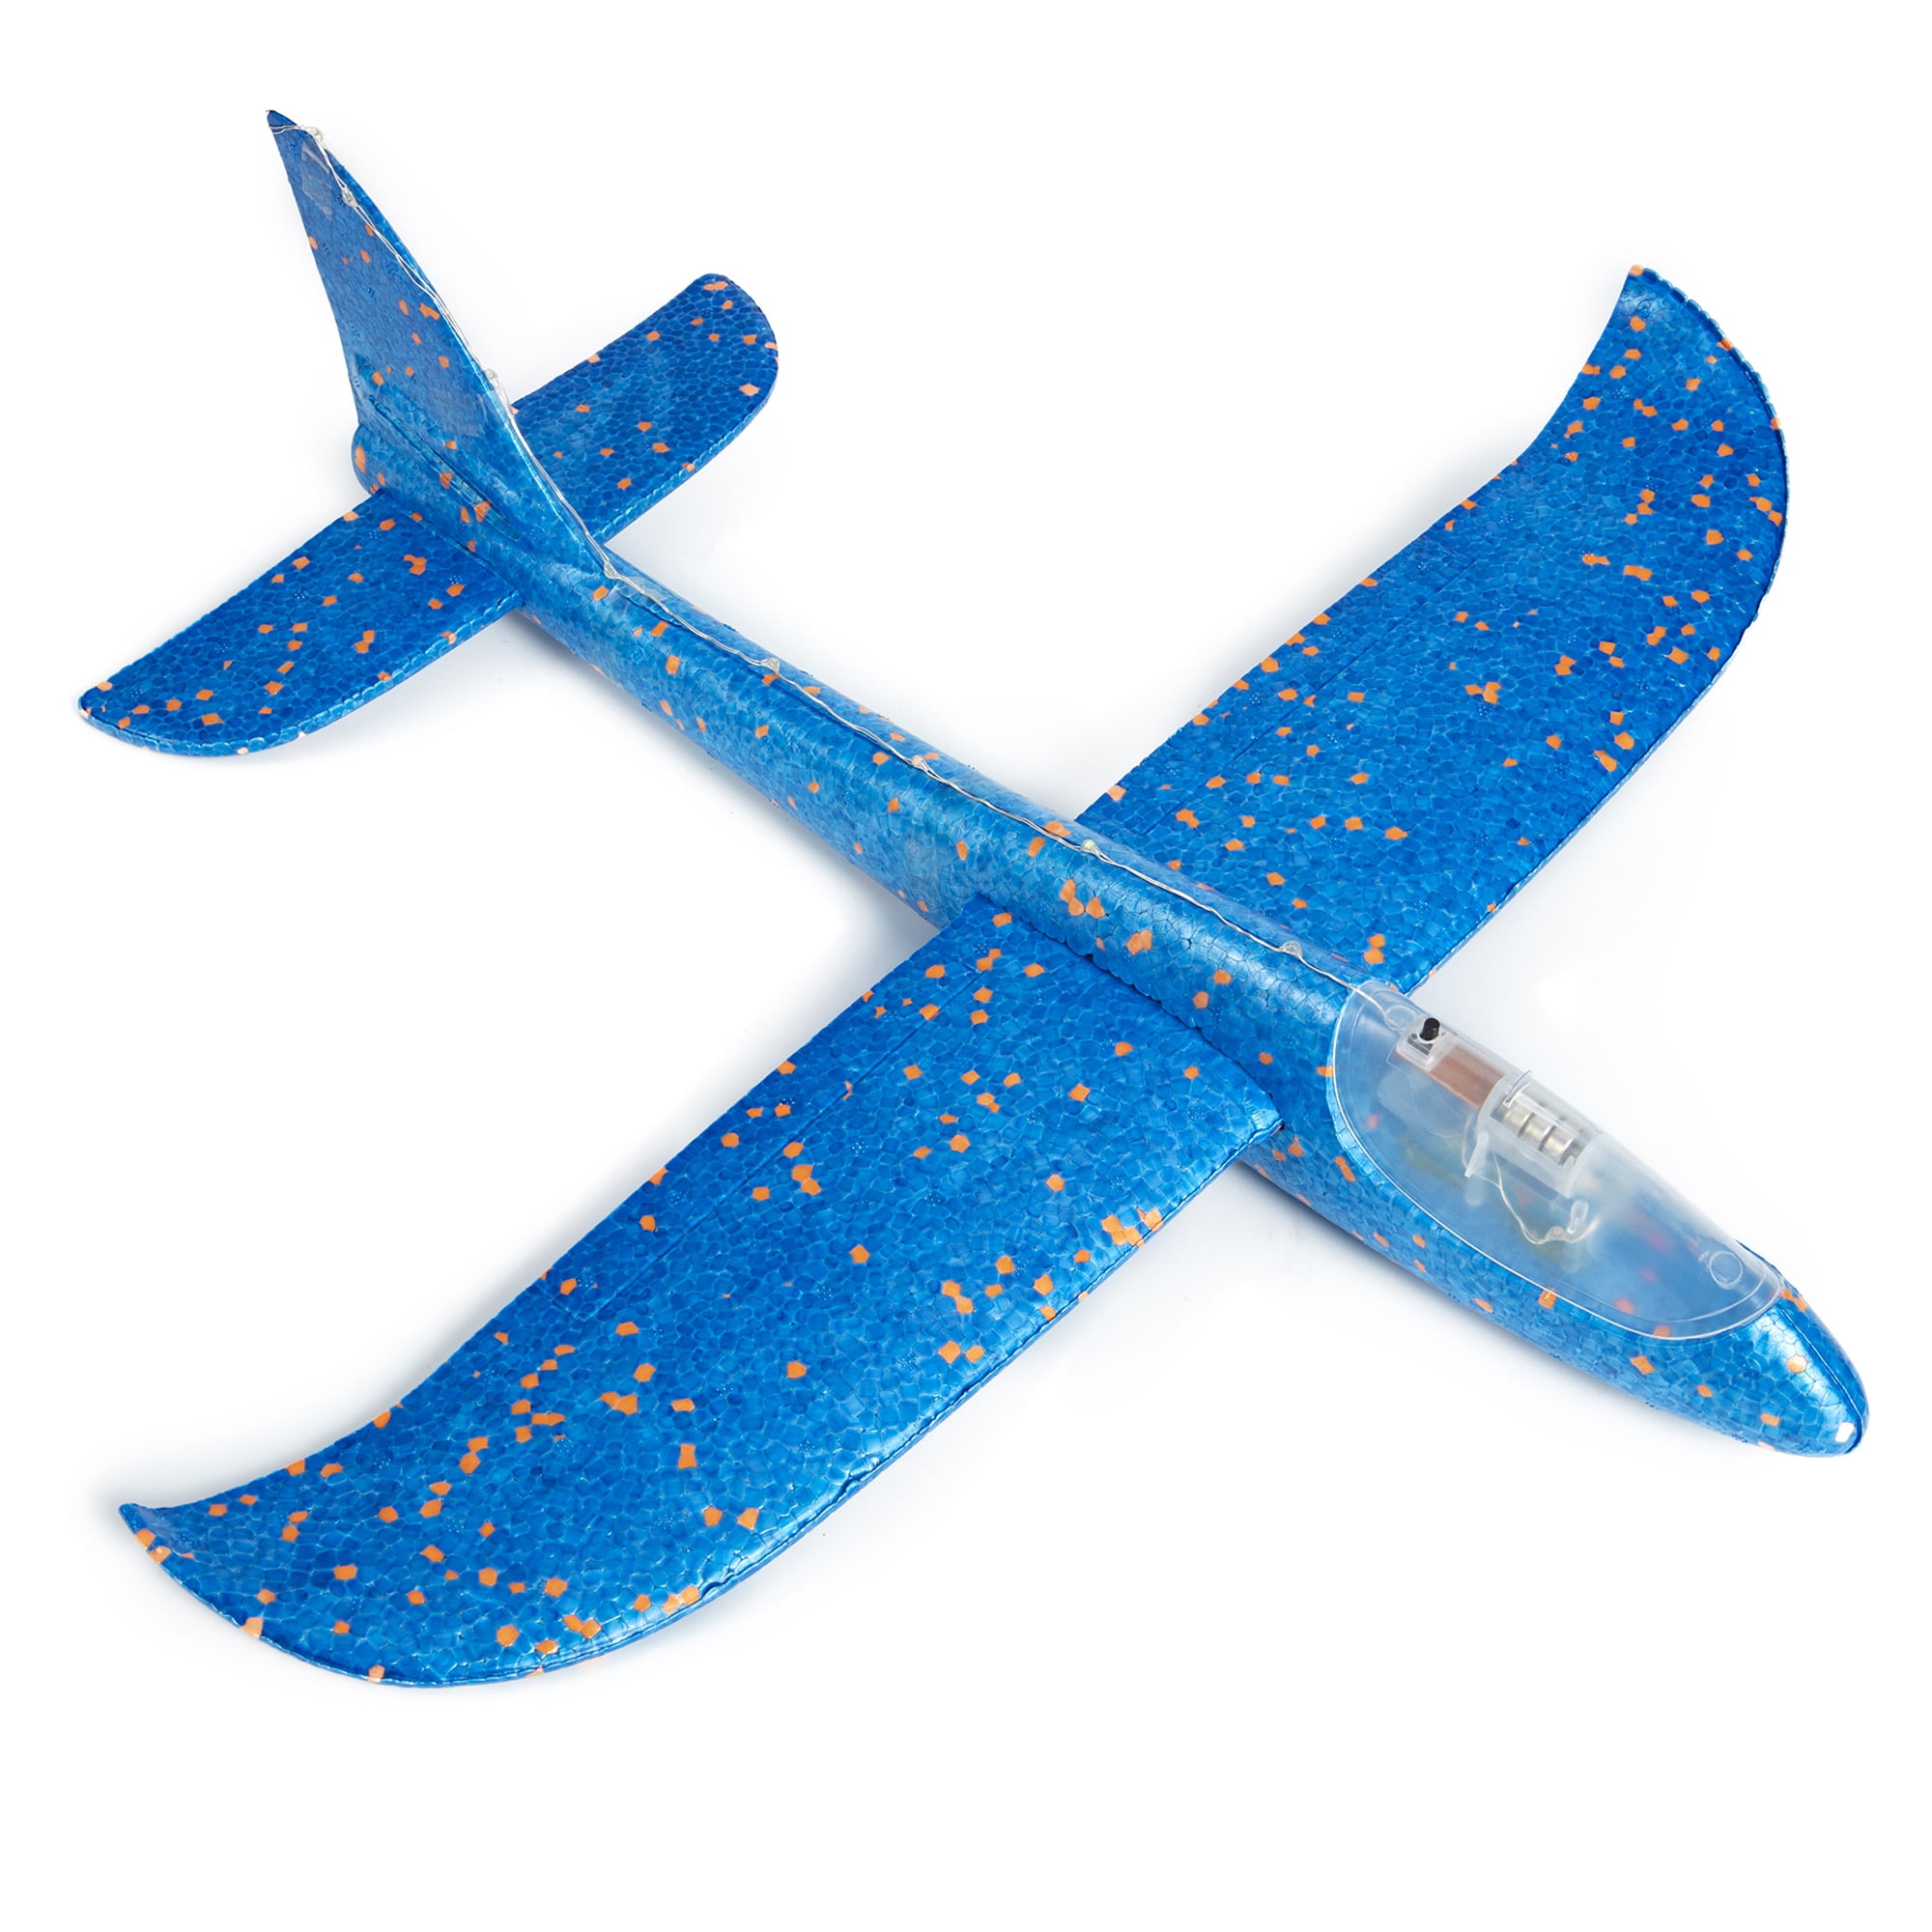 Blue Uuna Flashing Luminous Flying Toys Foam Plane Glider Manual Throwing Airplane Dual Flight Mode with LED Light Charming Shining Fly at Night Outdoor Sports Toy for Kids Girl boy as Best Gift 